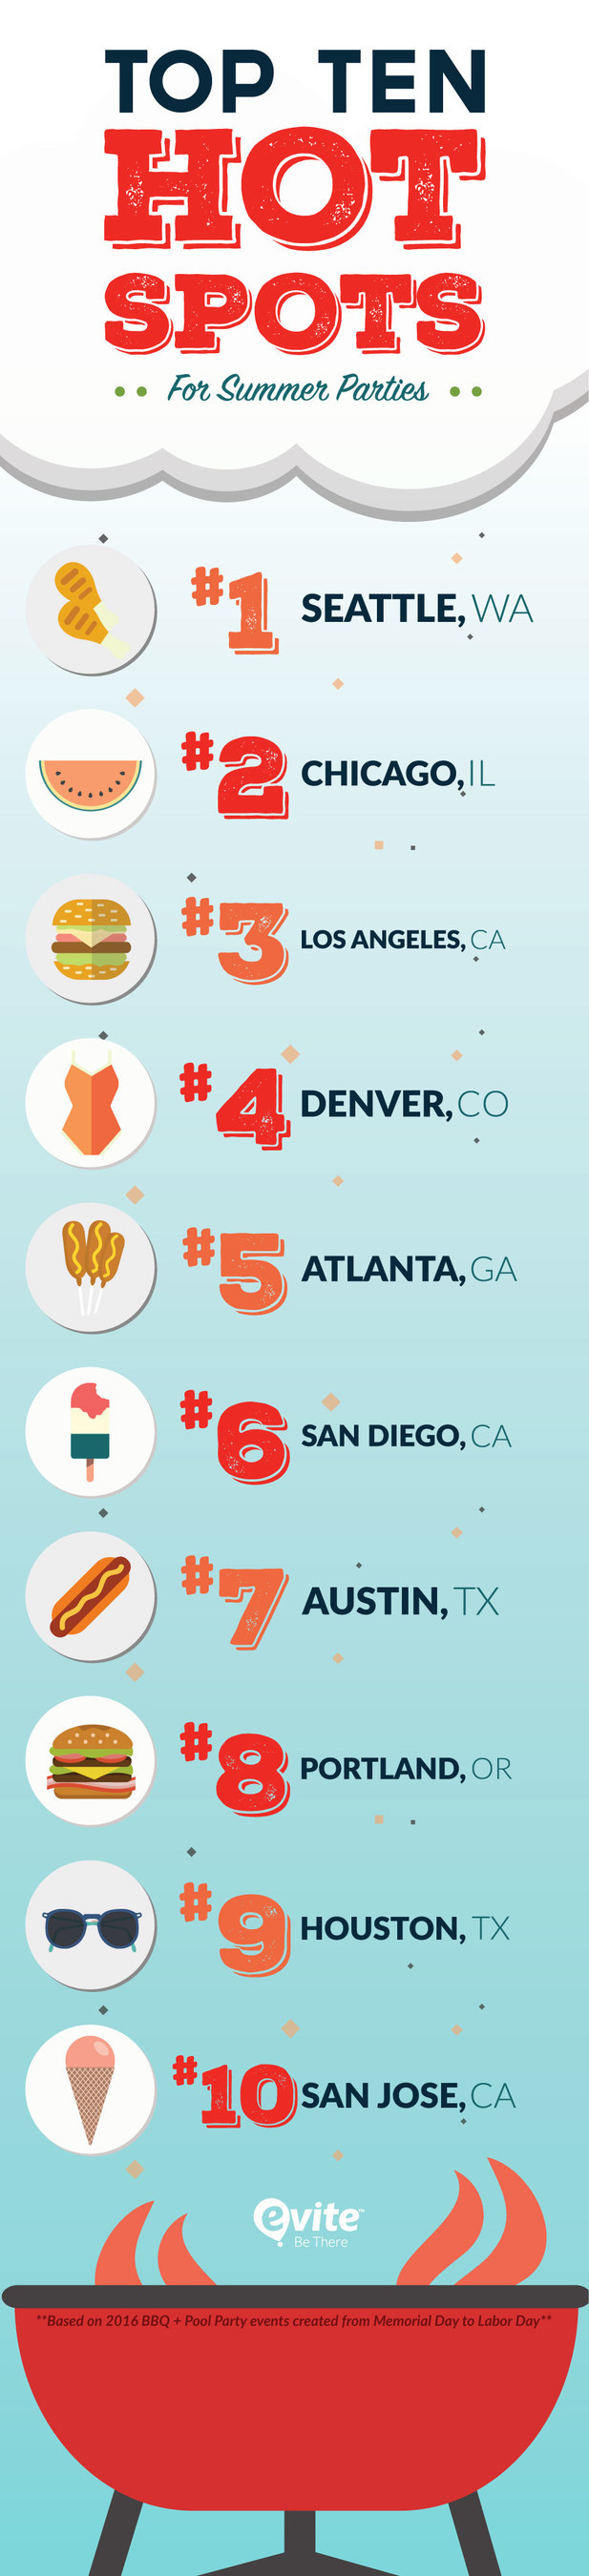 Evite® Announces Top 10 Cities for Summer BBQ/Pool Parties